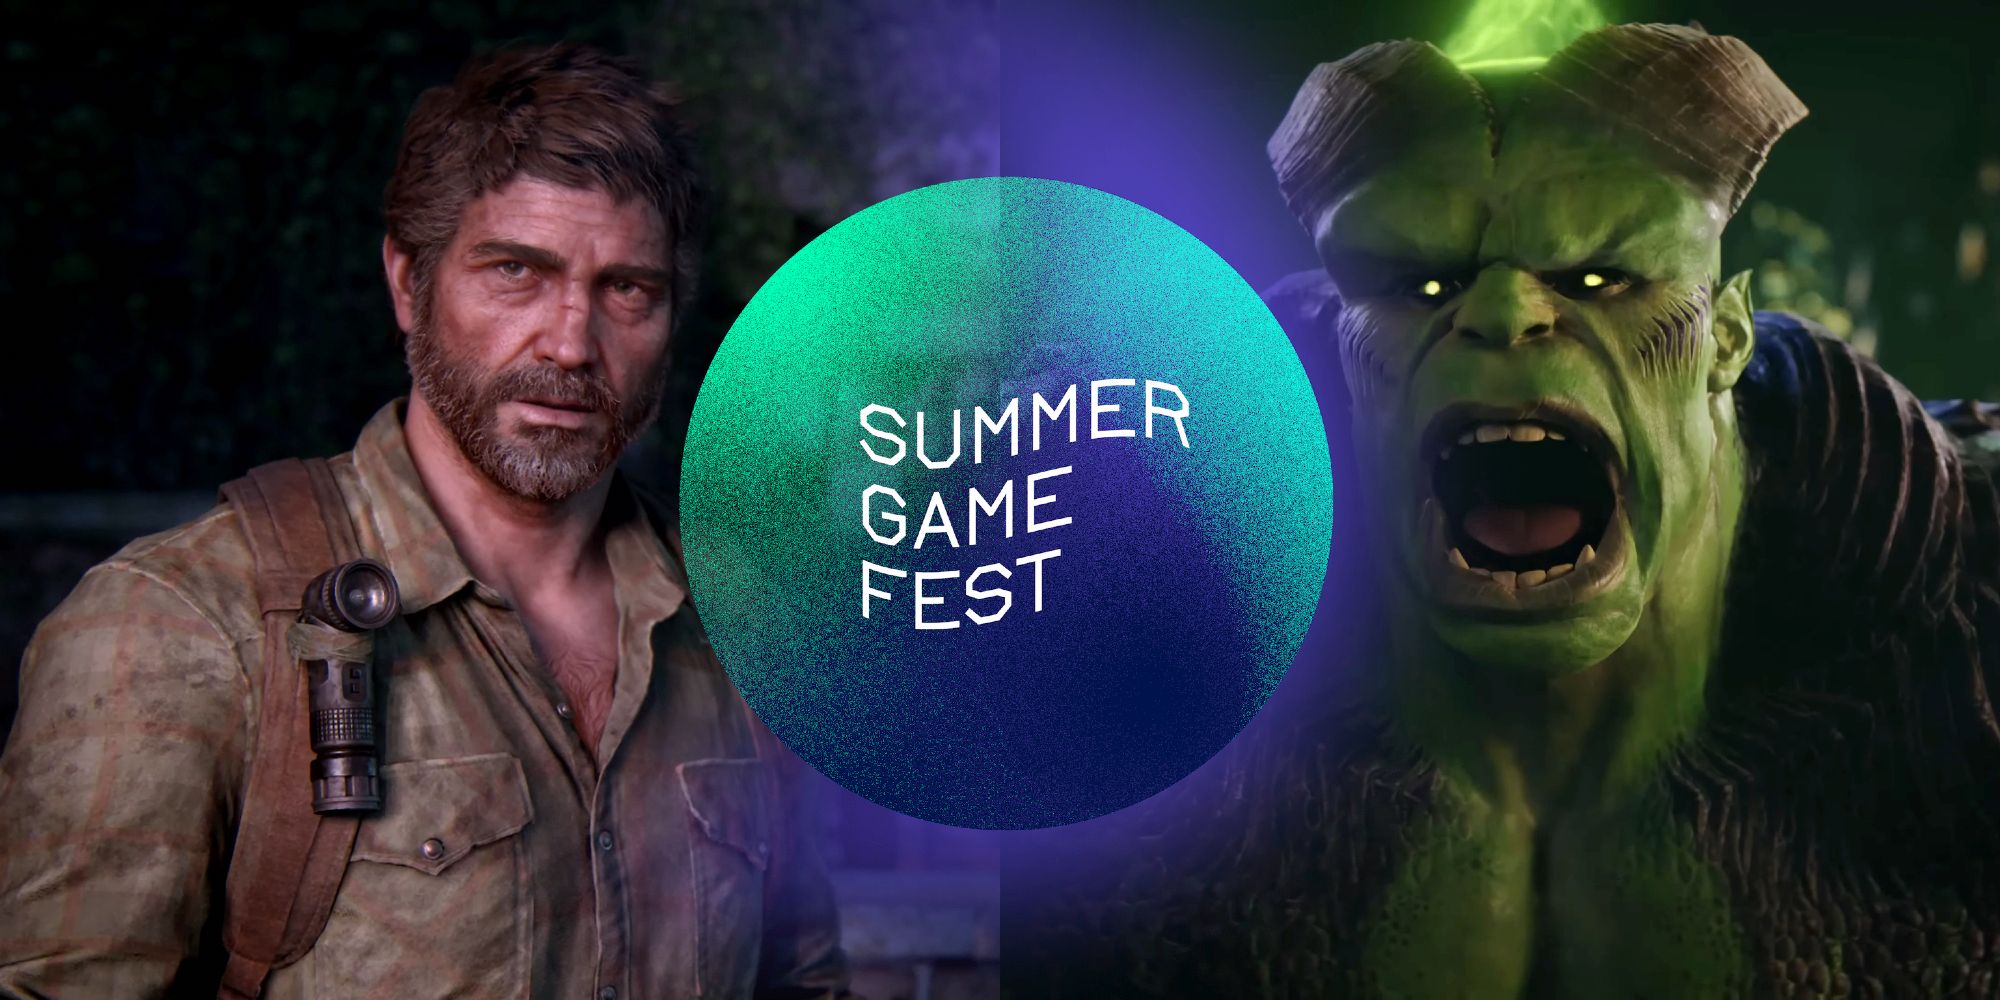 The biggest reveals from Summer Game Fest's 2022 live show include The Callisto Protocol, Call of Duty: Modern Warfare 2, Marvel's Midnight Suns, and The Last of Us Part 1.